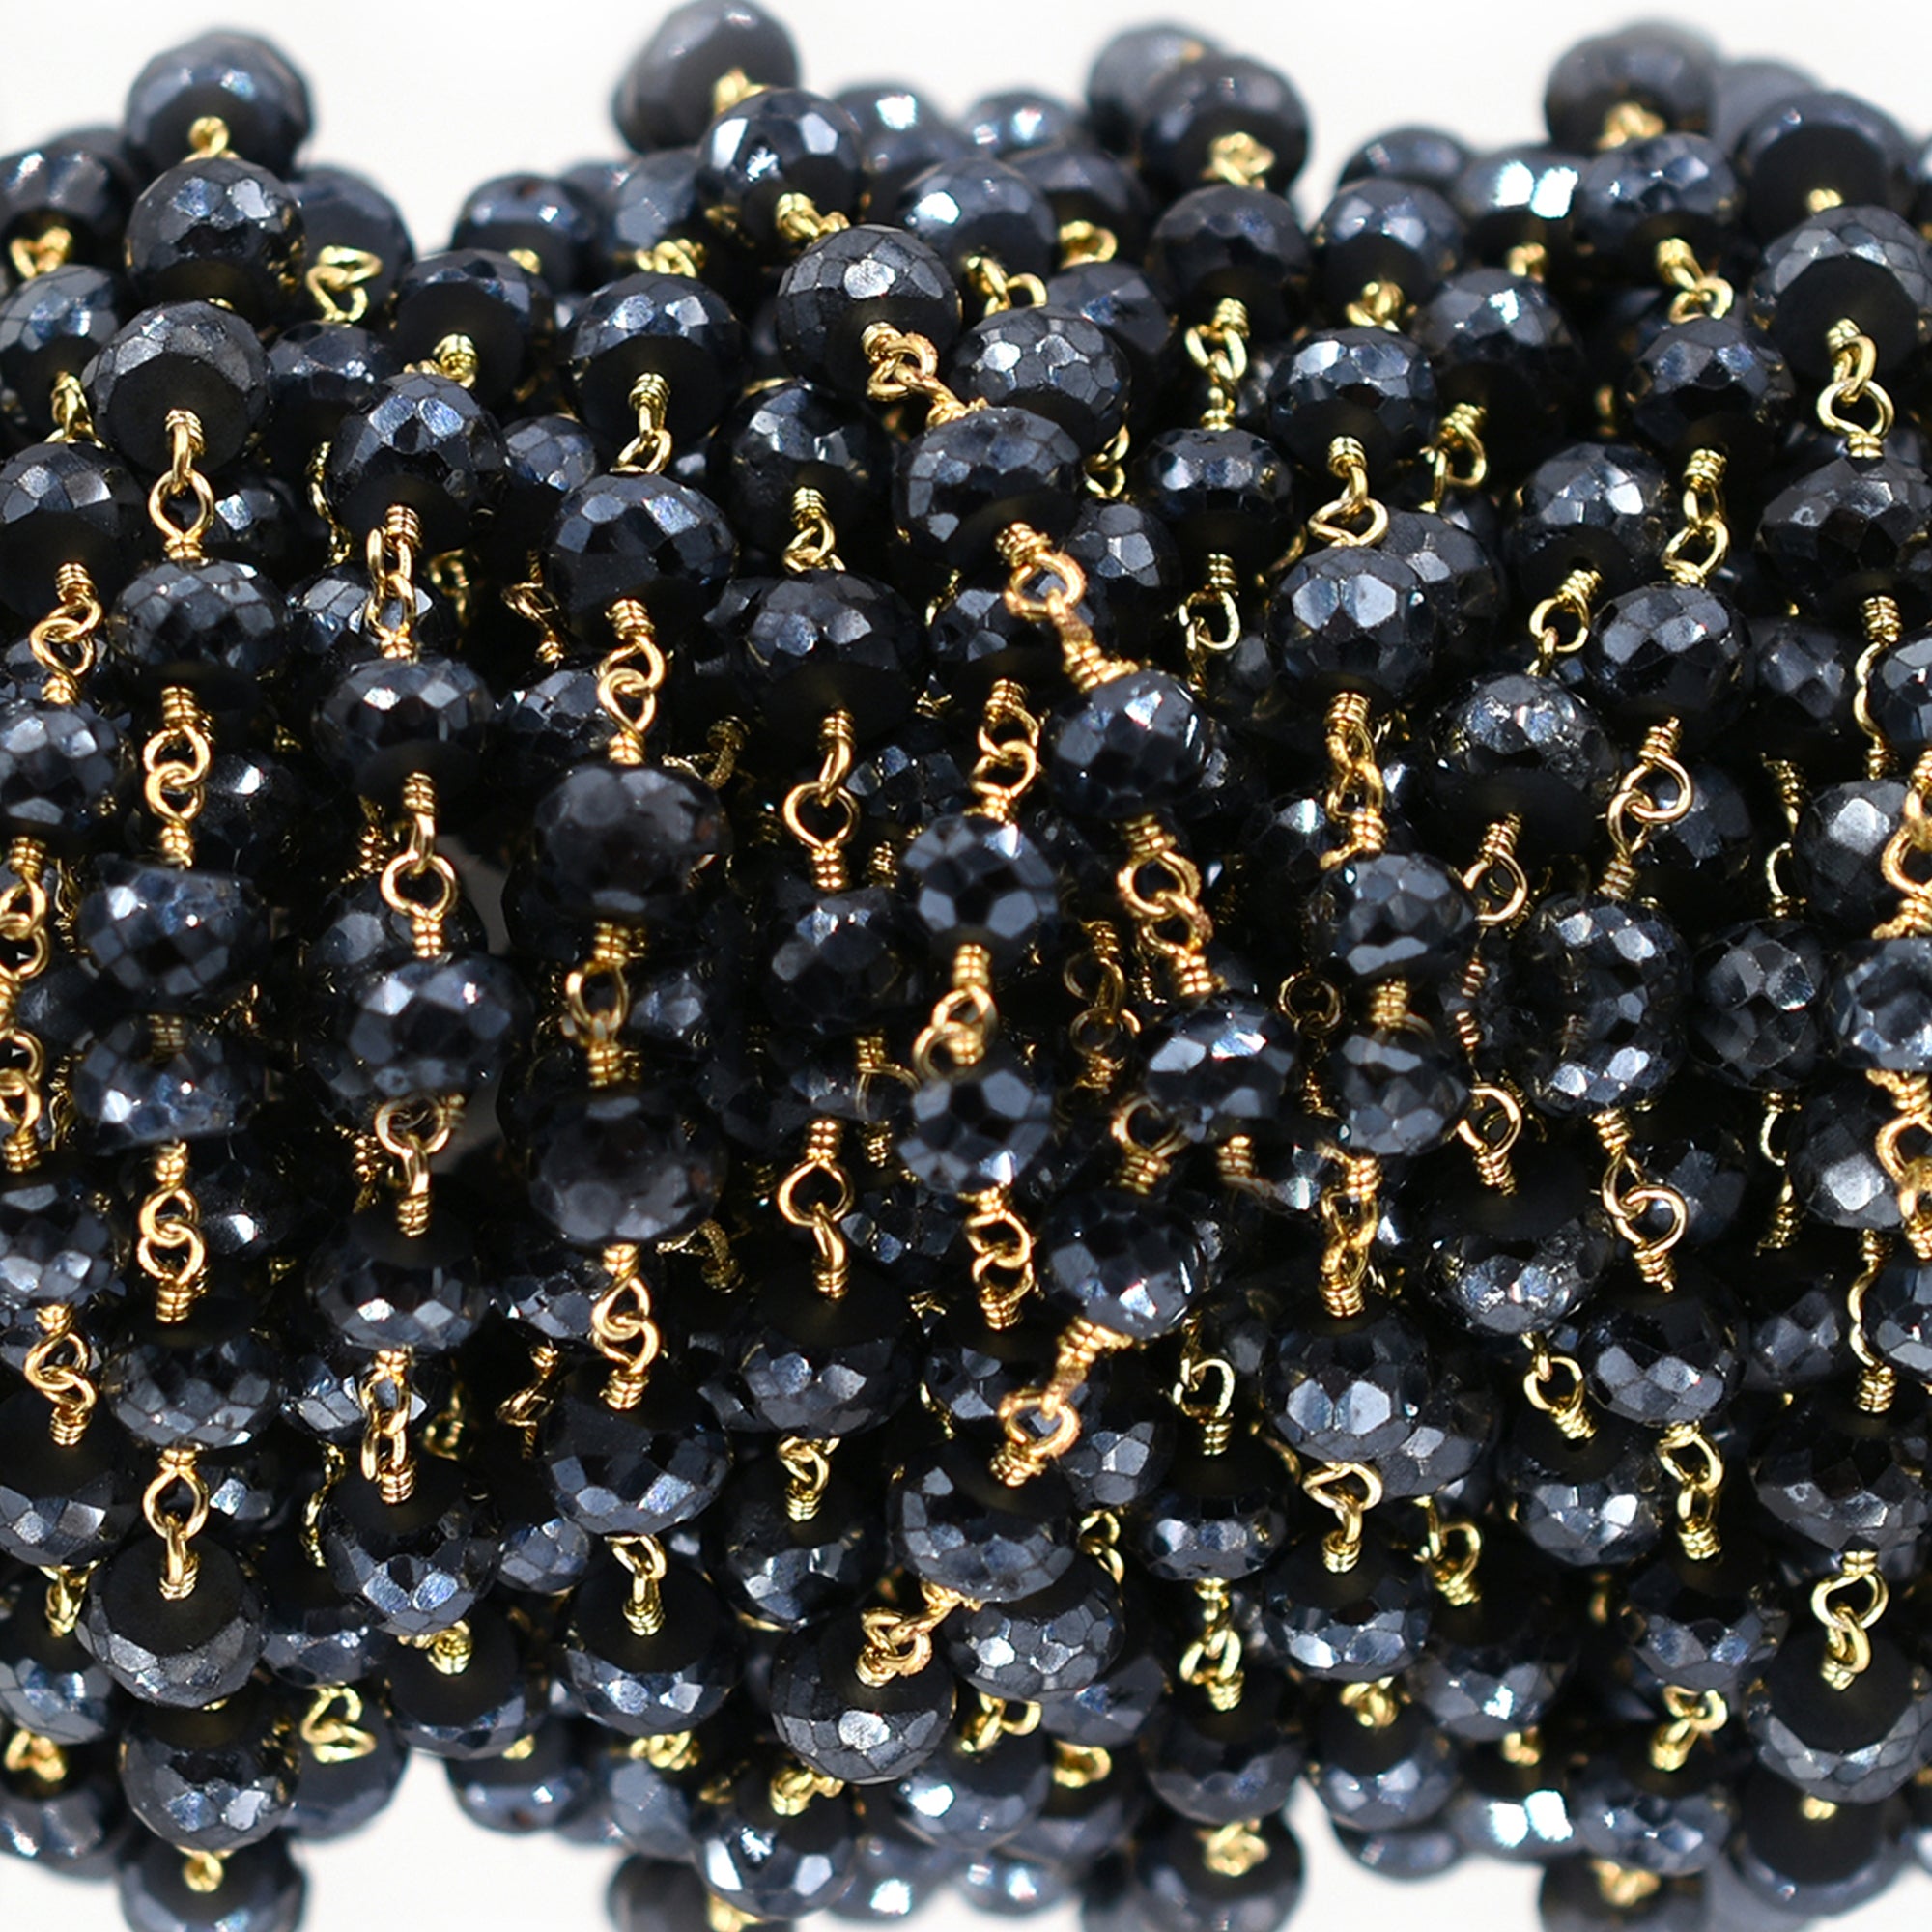 Mystique Black Spinel 5 To 6 MM Faceted Mystique Coated Rondelle Brass Gold Plated Wire Wrapped Chain Sold by Foot